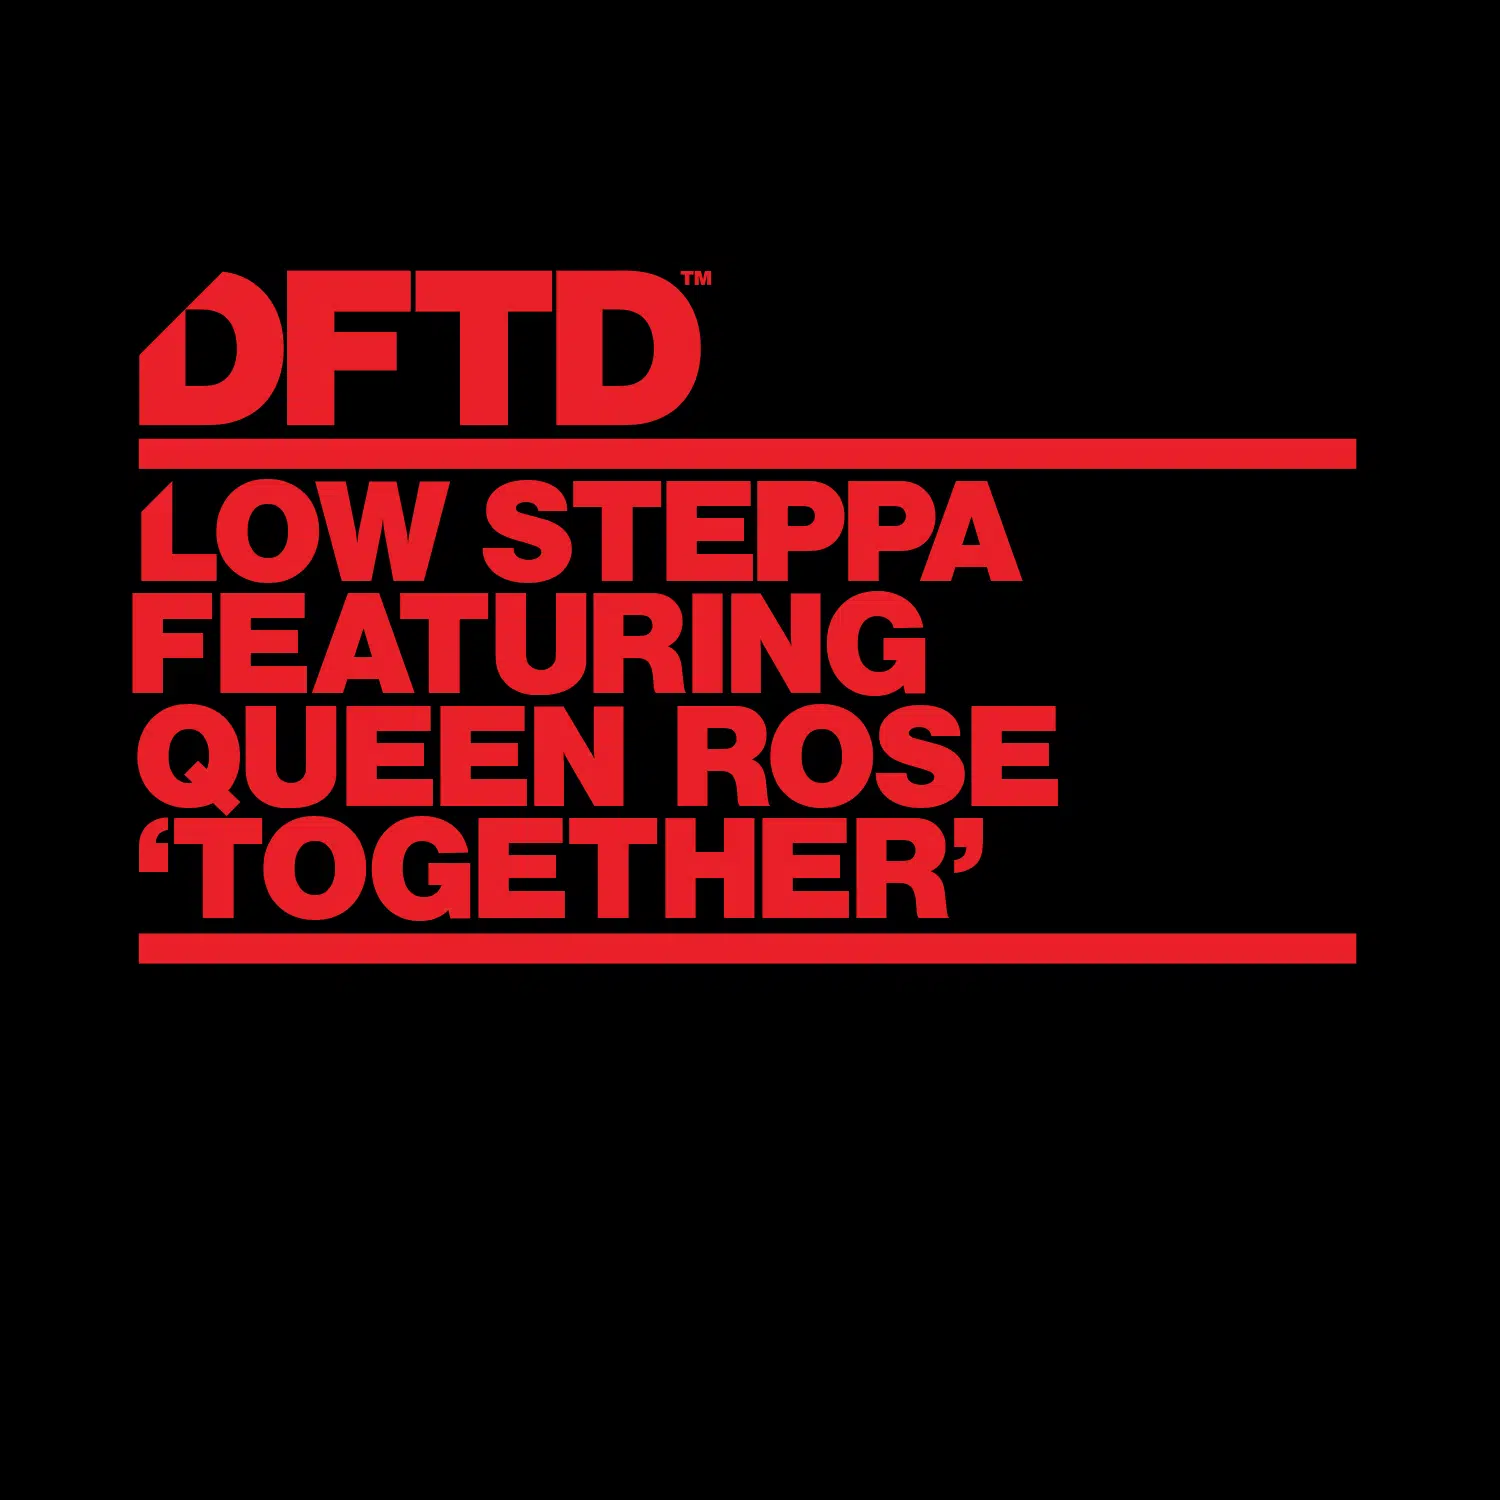 Low Steppa ft Queen Rose “Together”